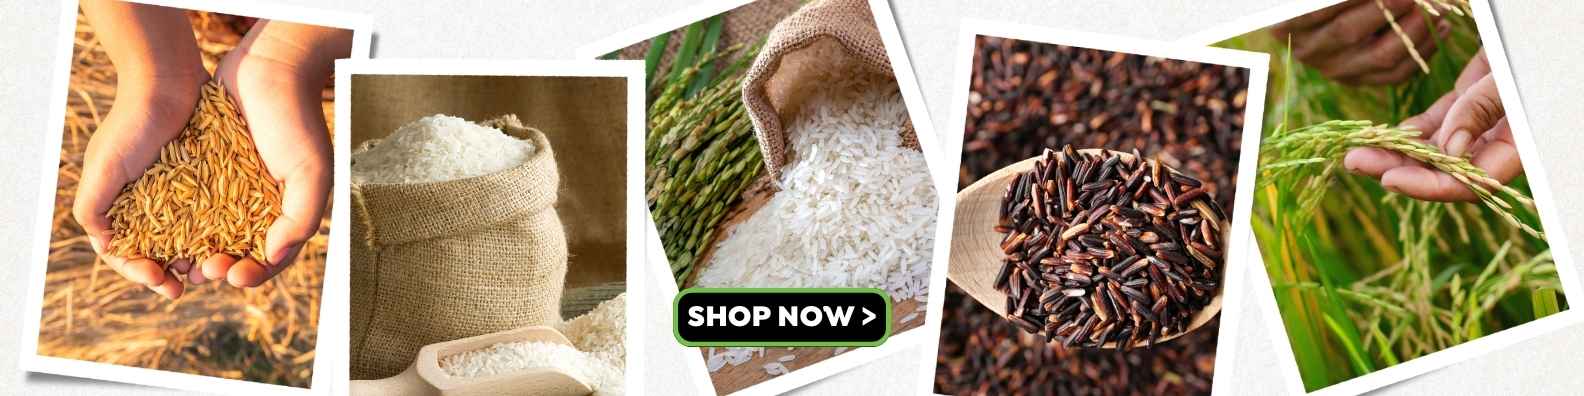 Organic Rice Products | health food store near me